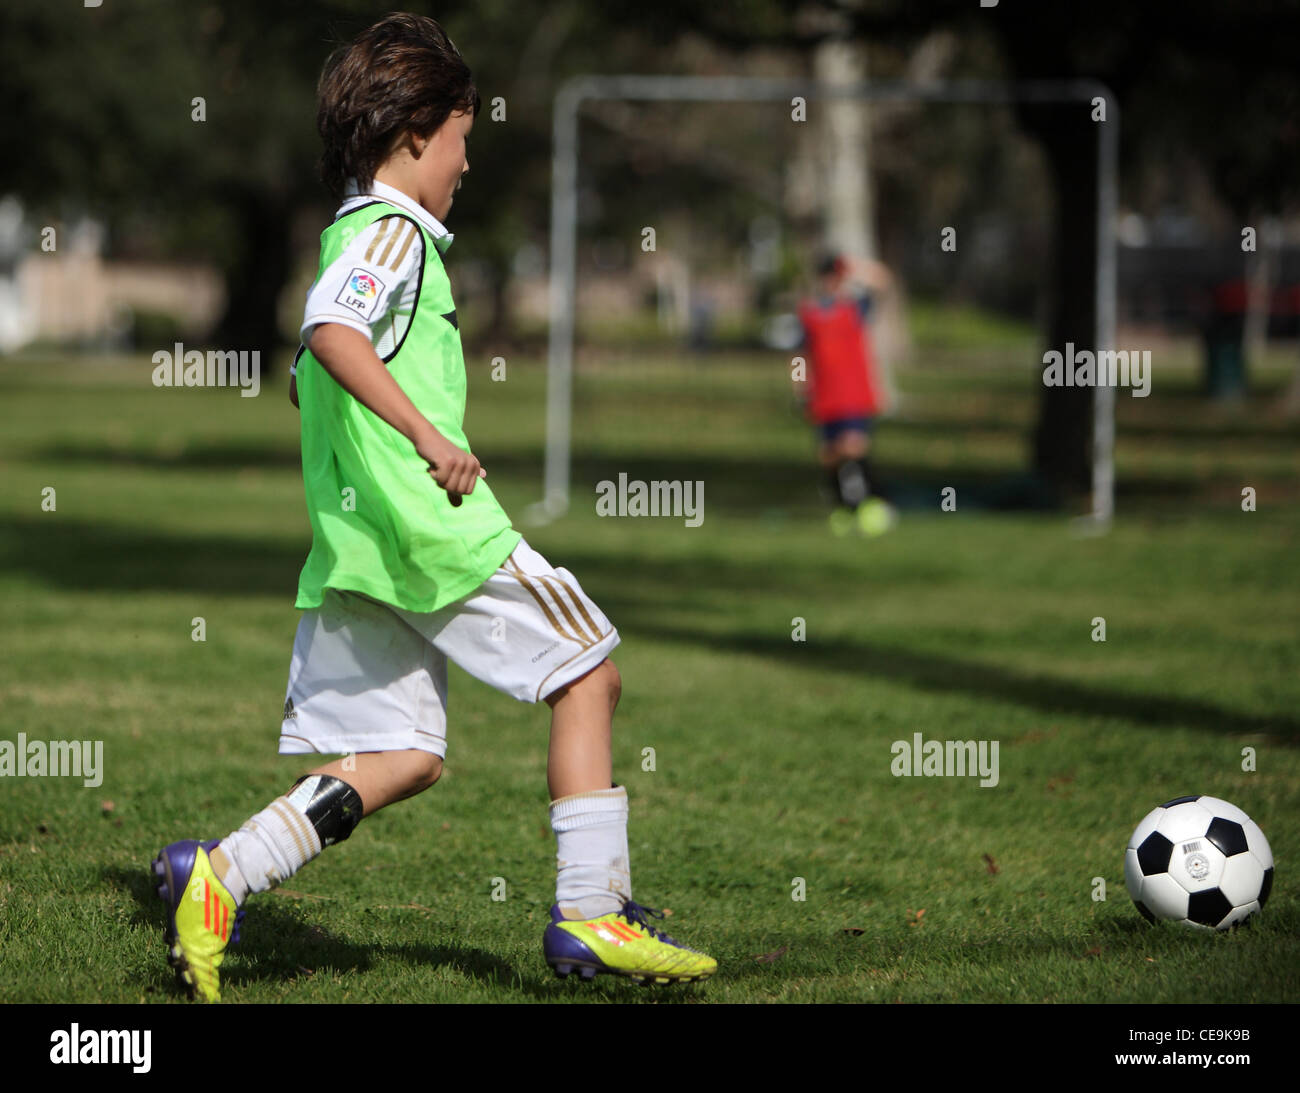 Young boy practices soccer for a youth team in Southern California.  Soccer is becoming much more popular in the United States. Stock Photo